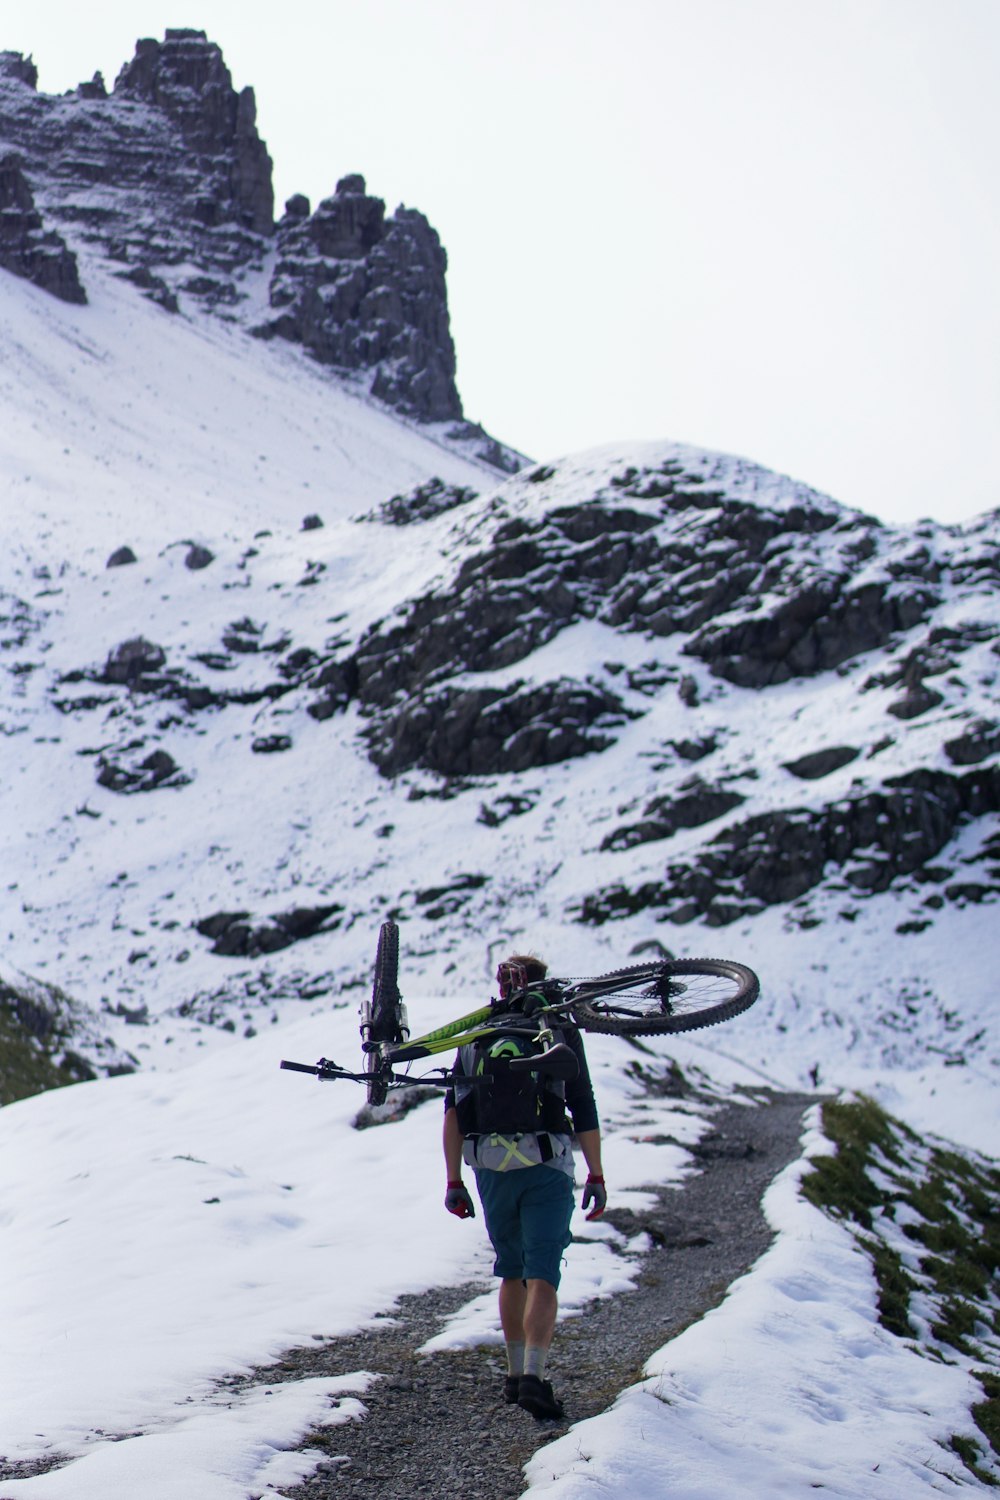 man carrying bicycle walking on mountain surrounded by snow